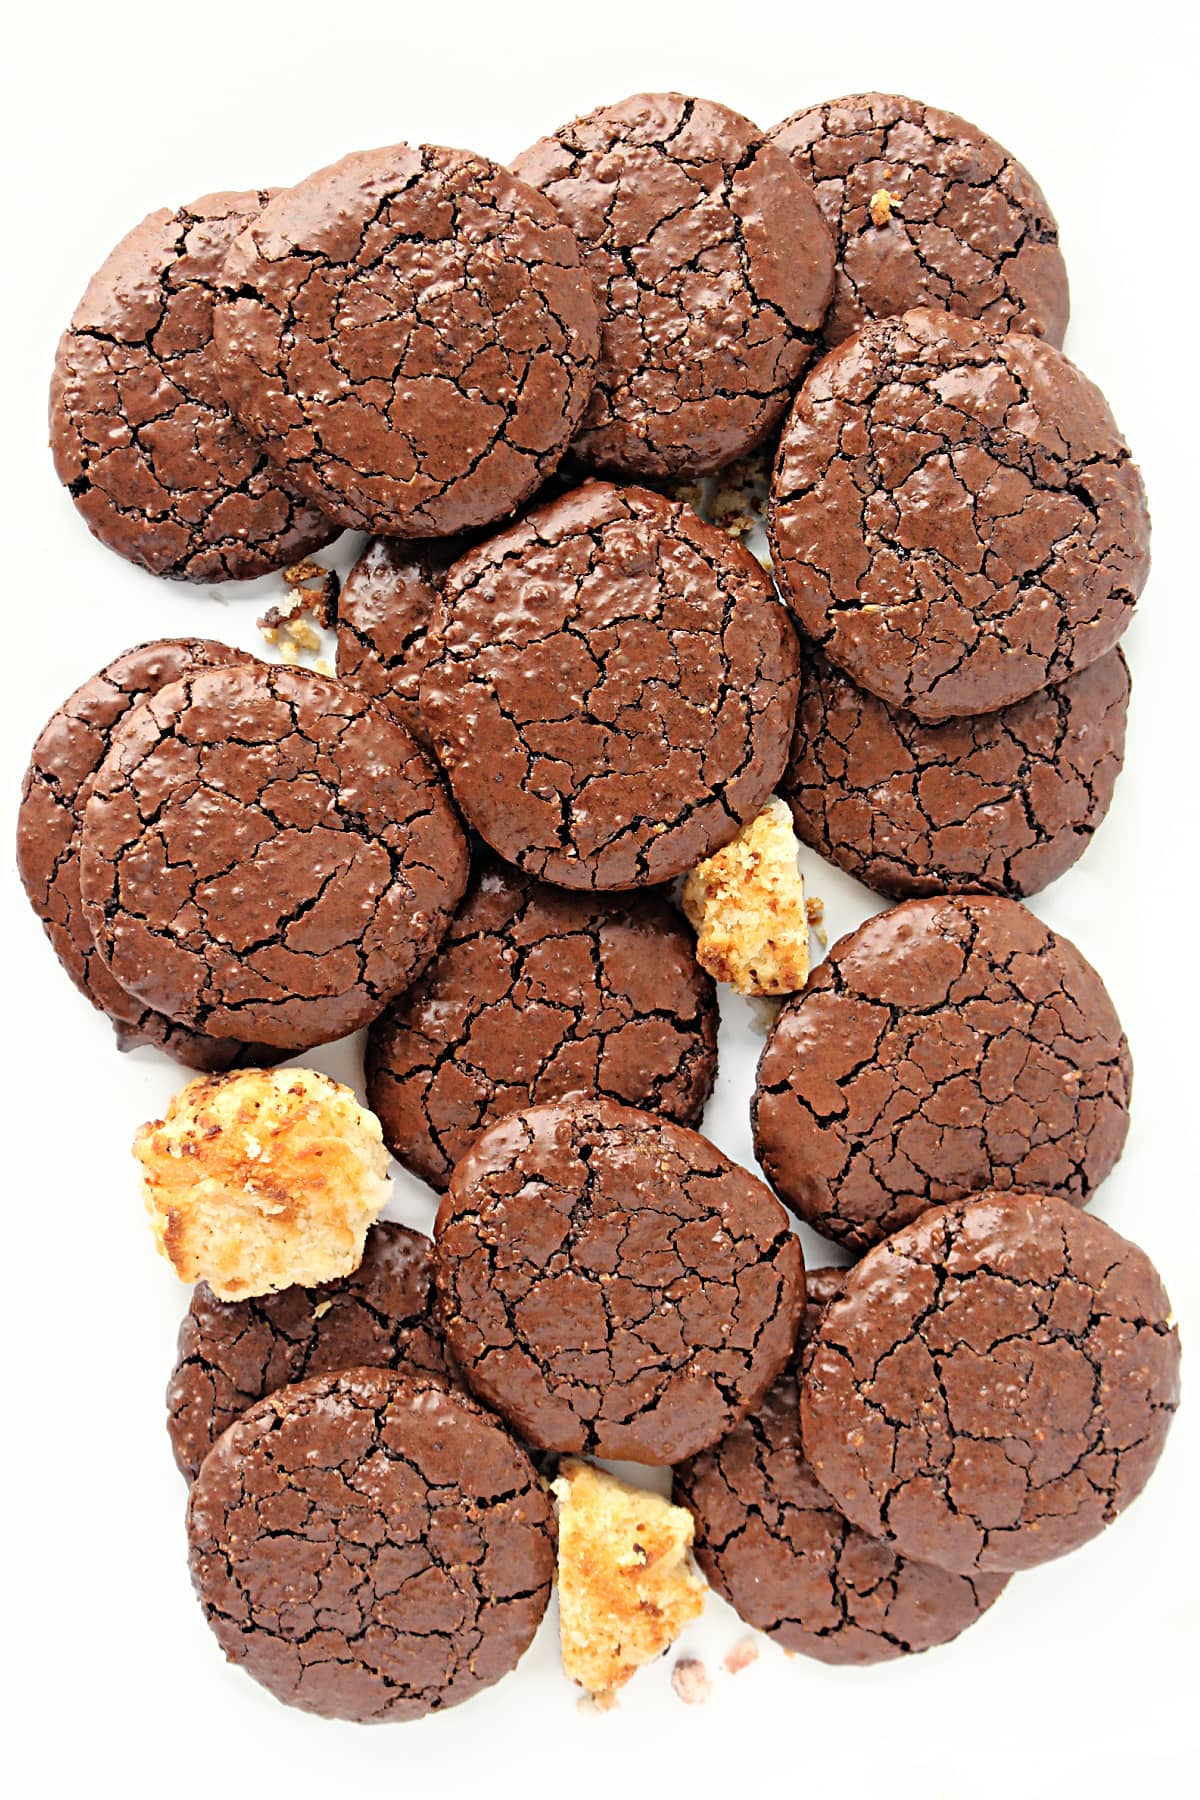 Flat chocolate cookies with a shiny, crackled top.